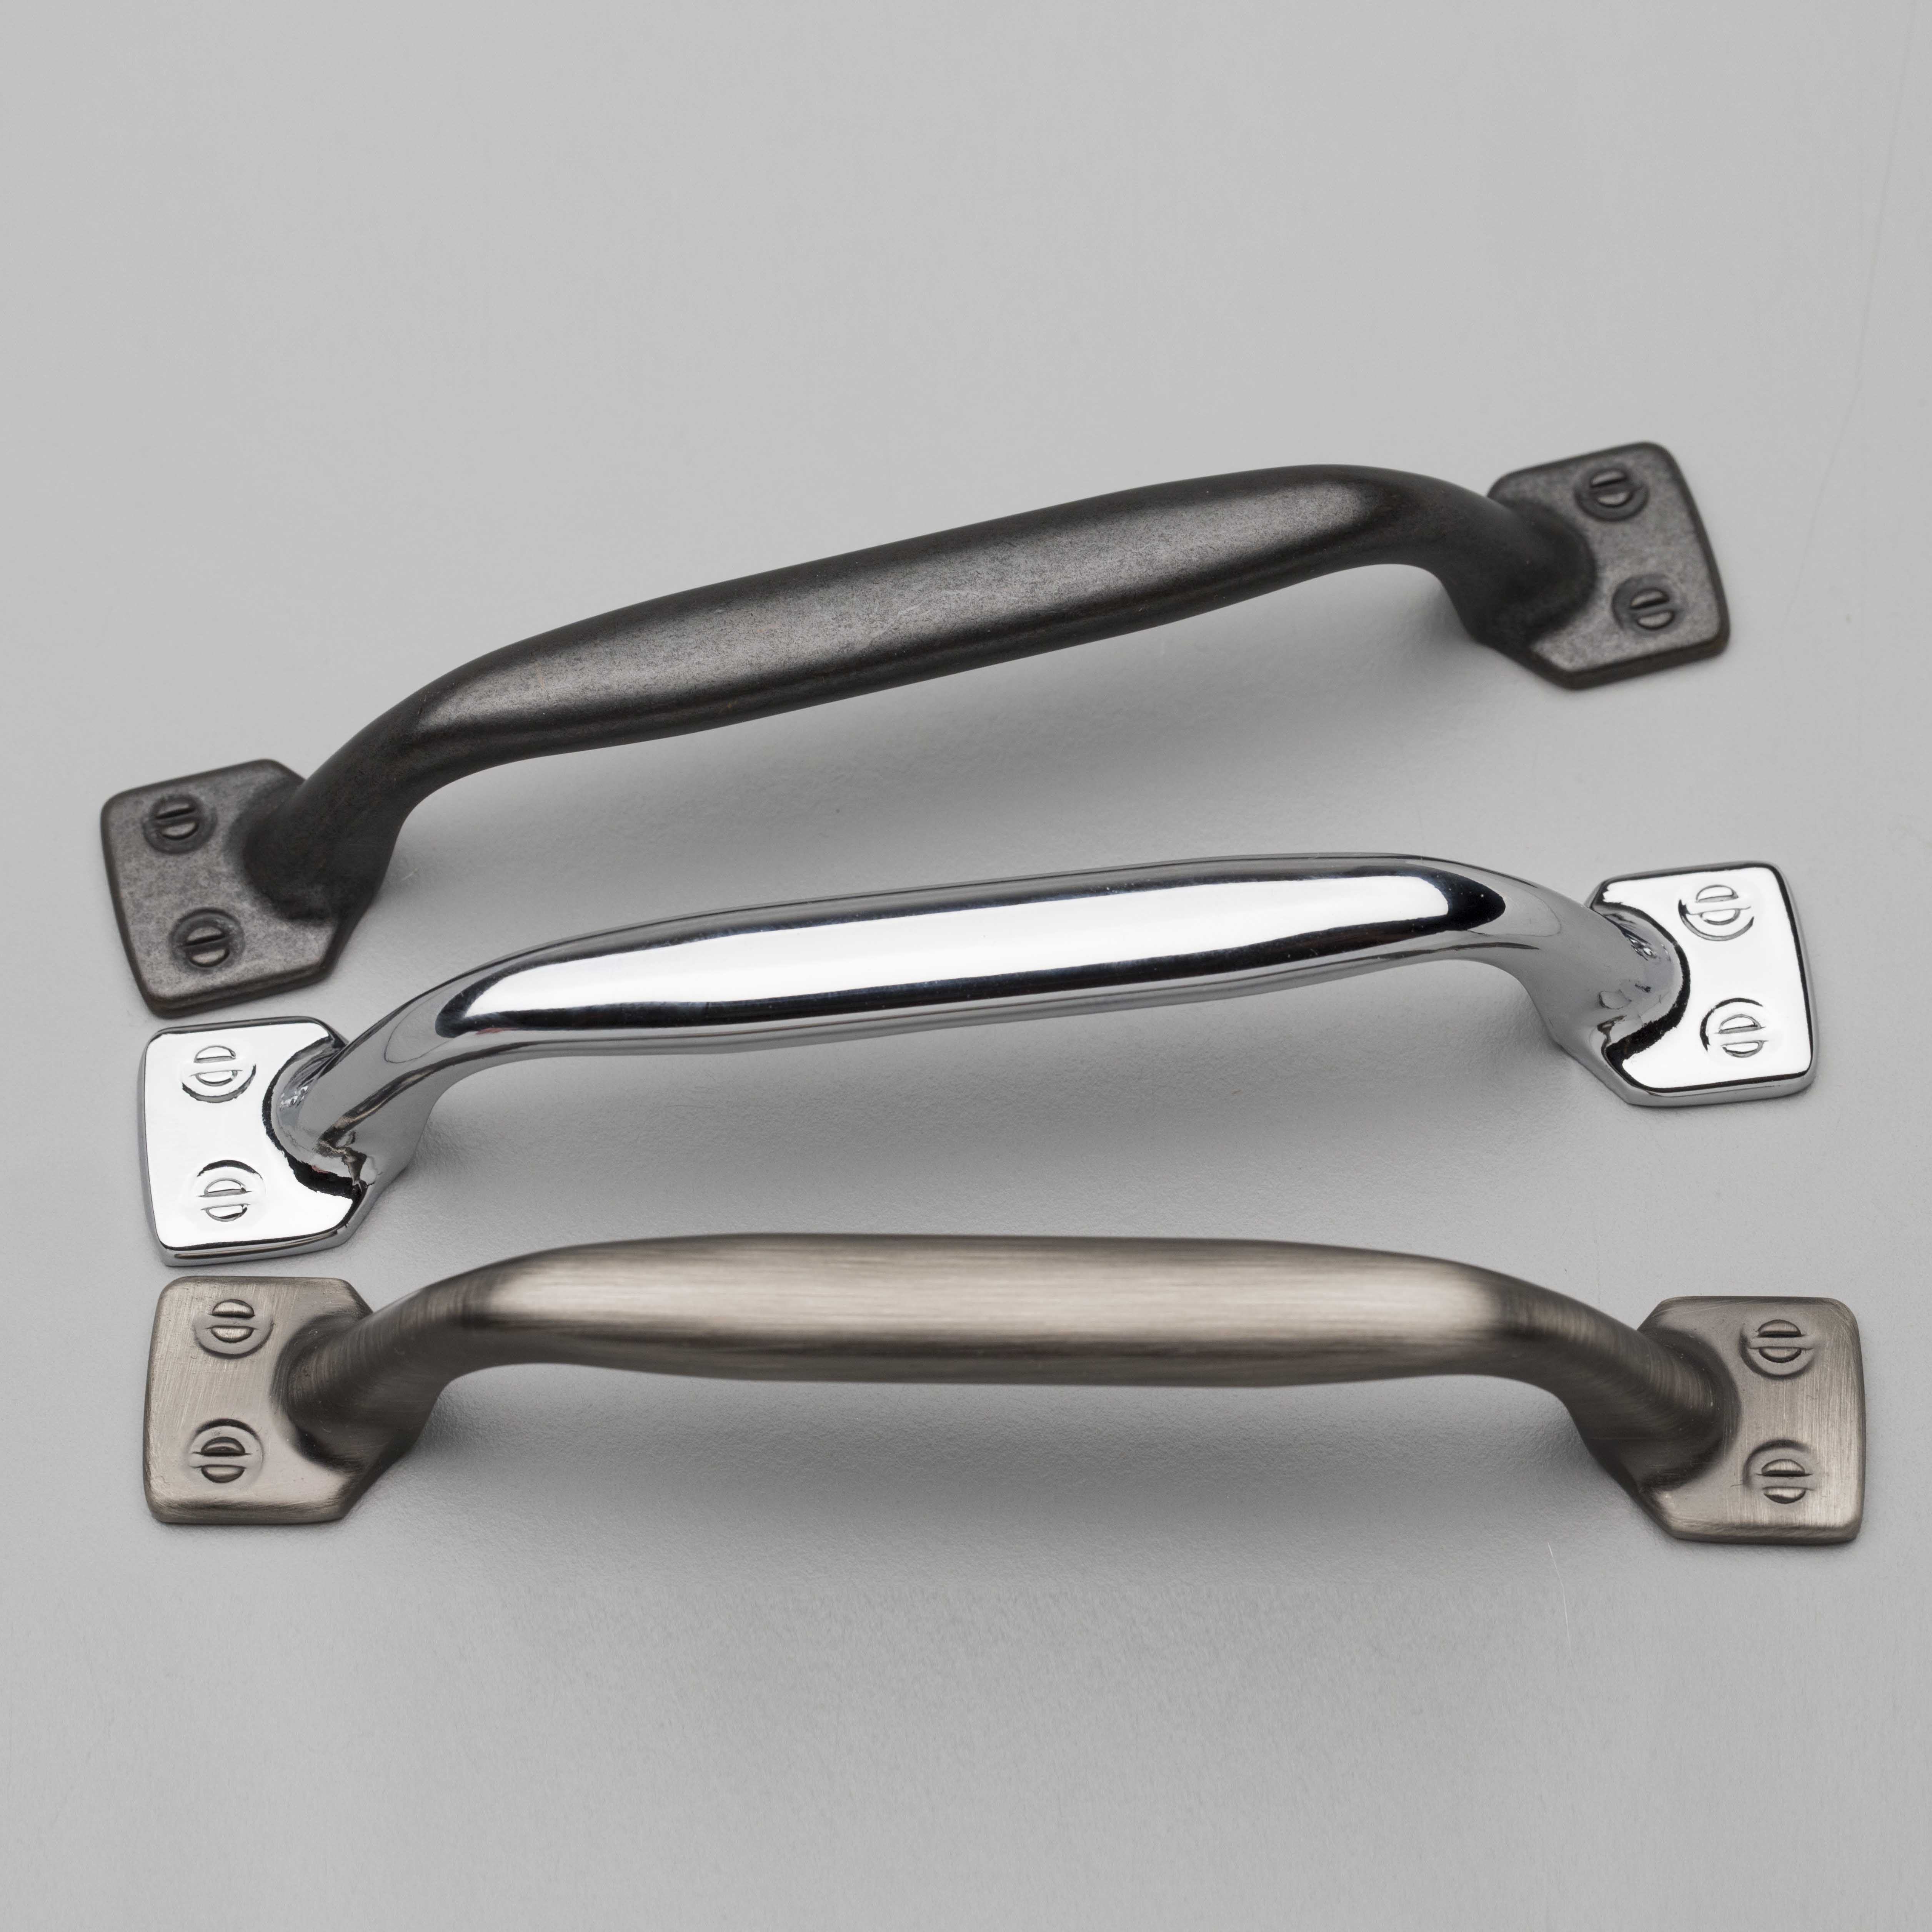 Ht508 Highland Handle shown in the colors of Industrial Black, Chrome & Black Olive